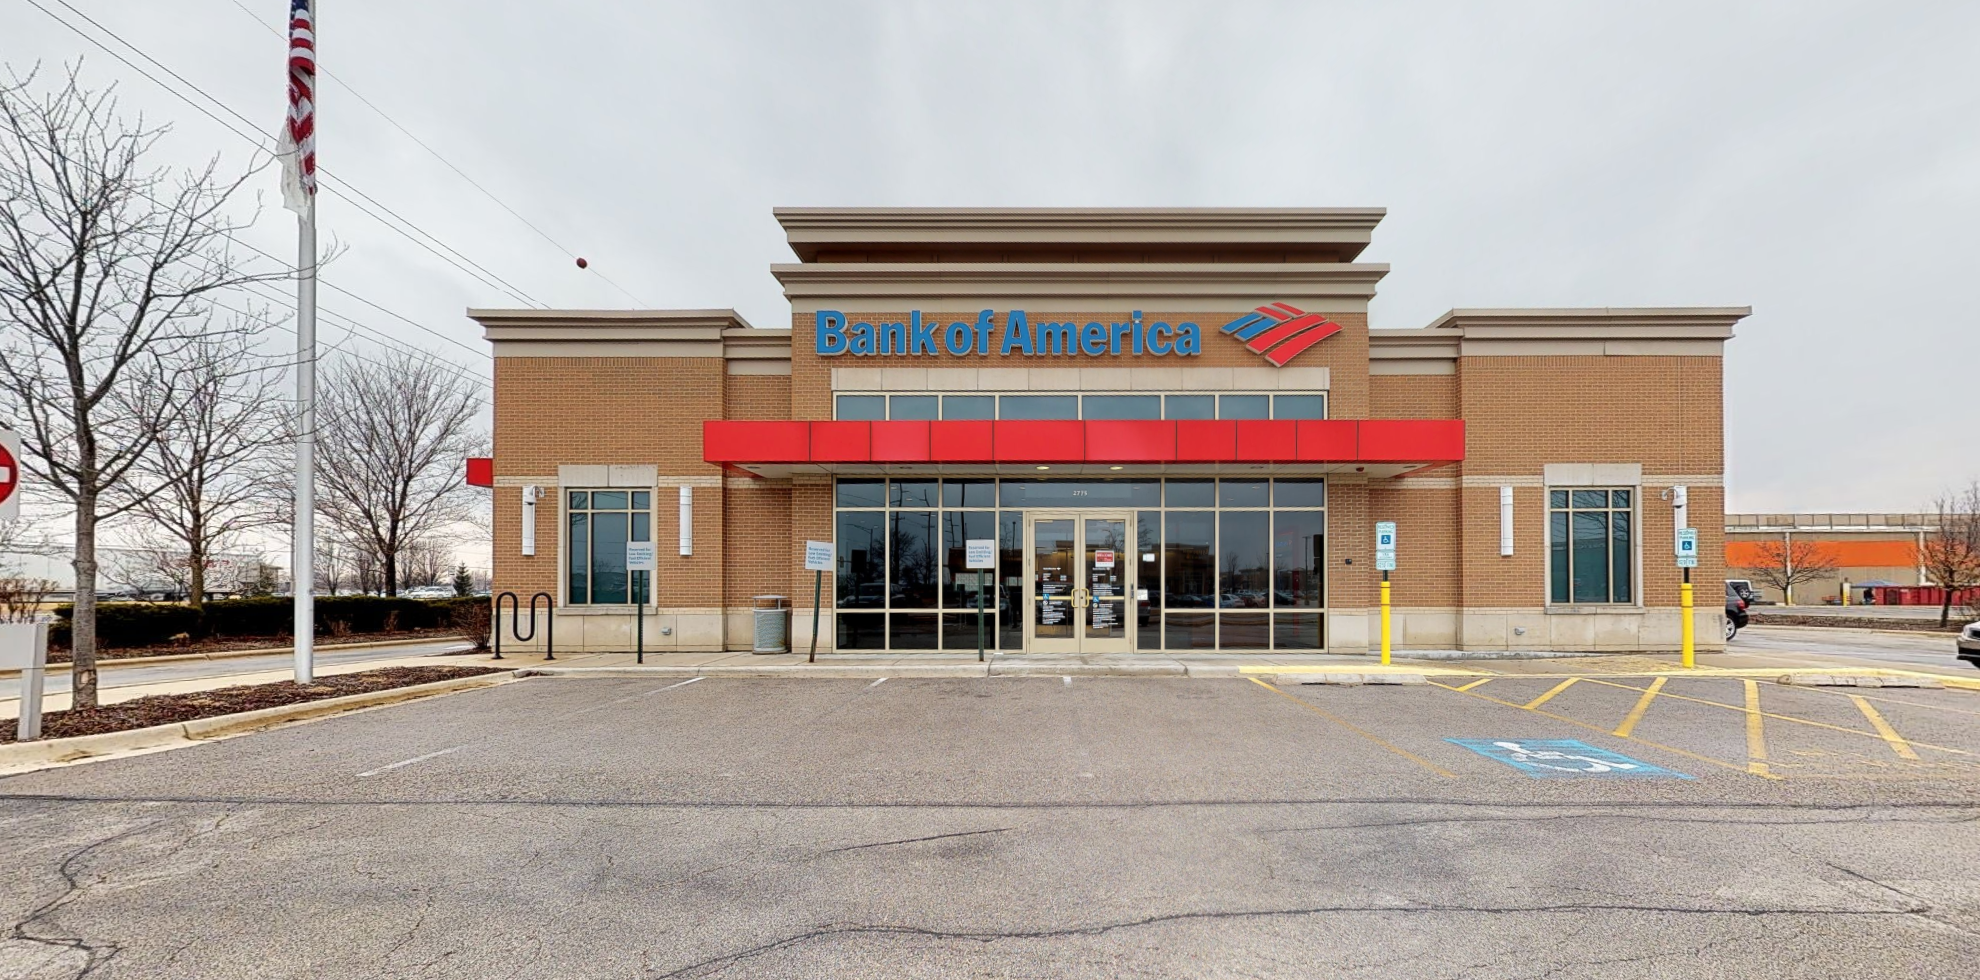 Bank of America financial center with drive-thru ATM | 2775 W 75th St, Naperville, IL 60540